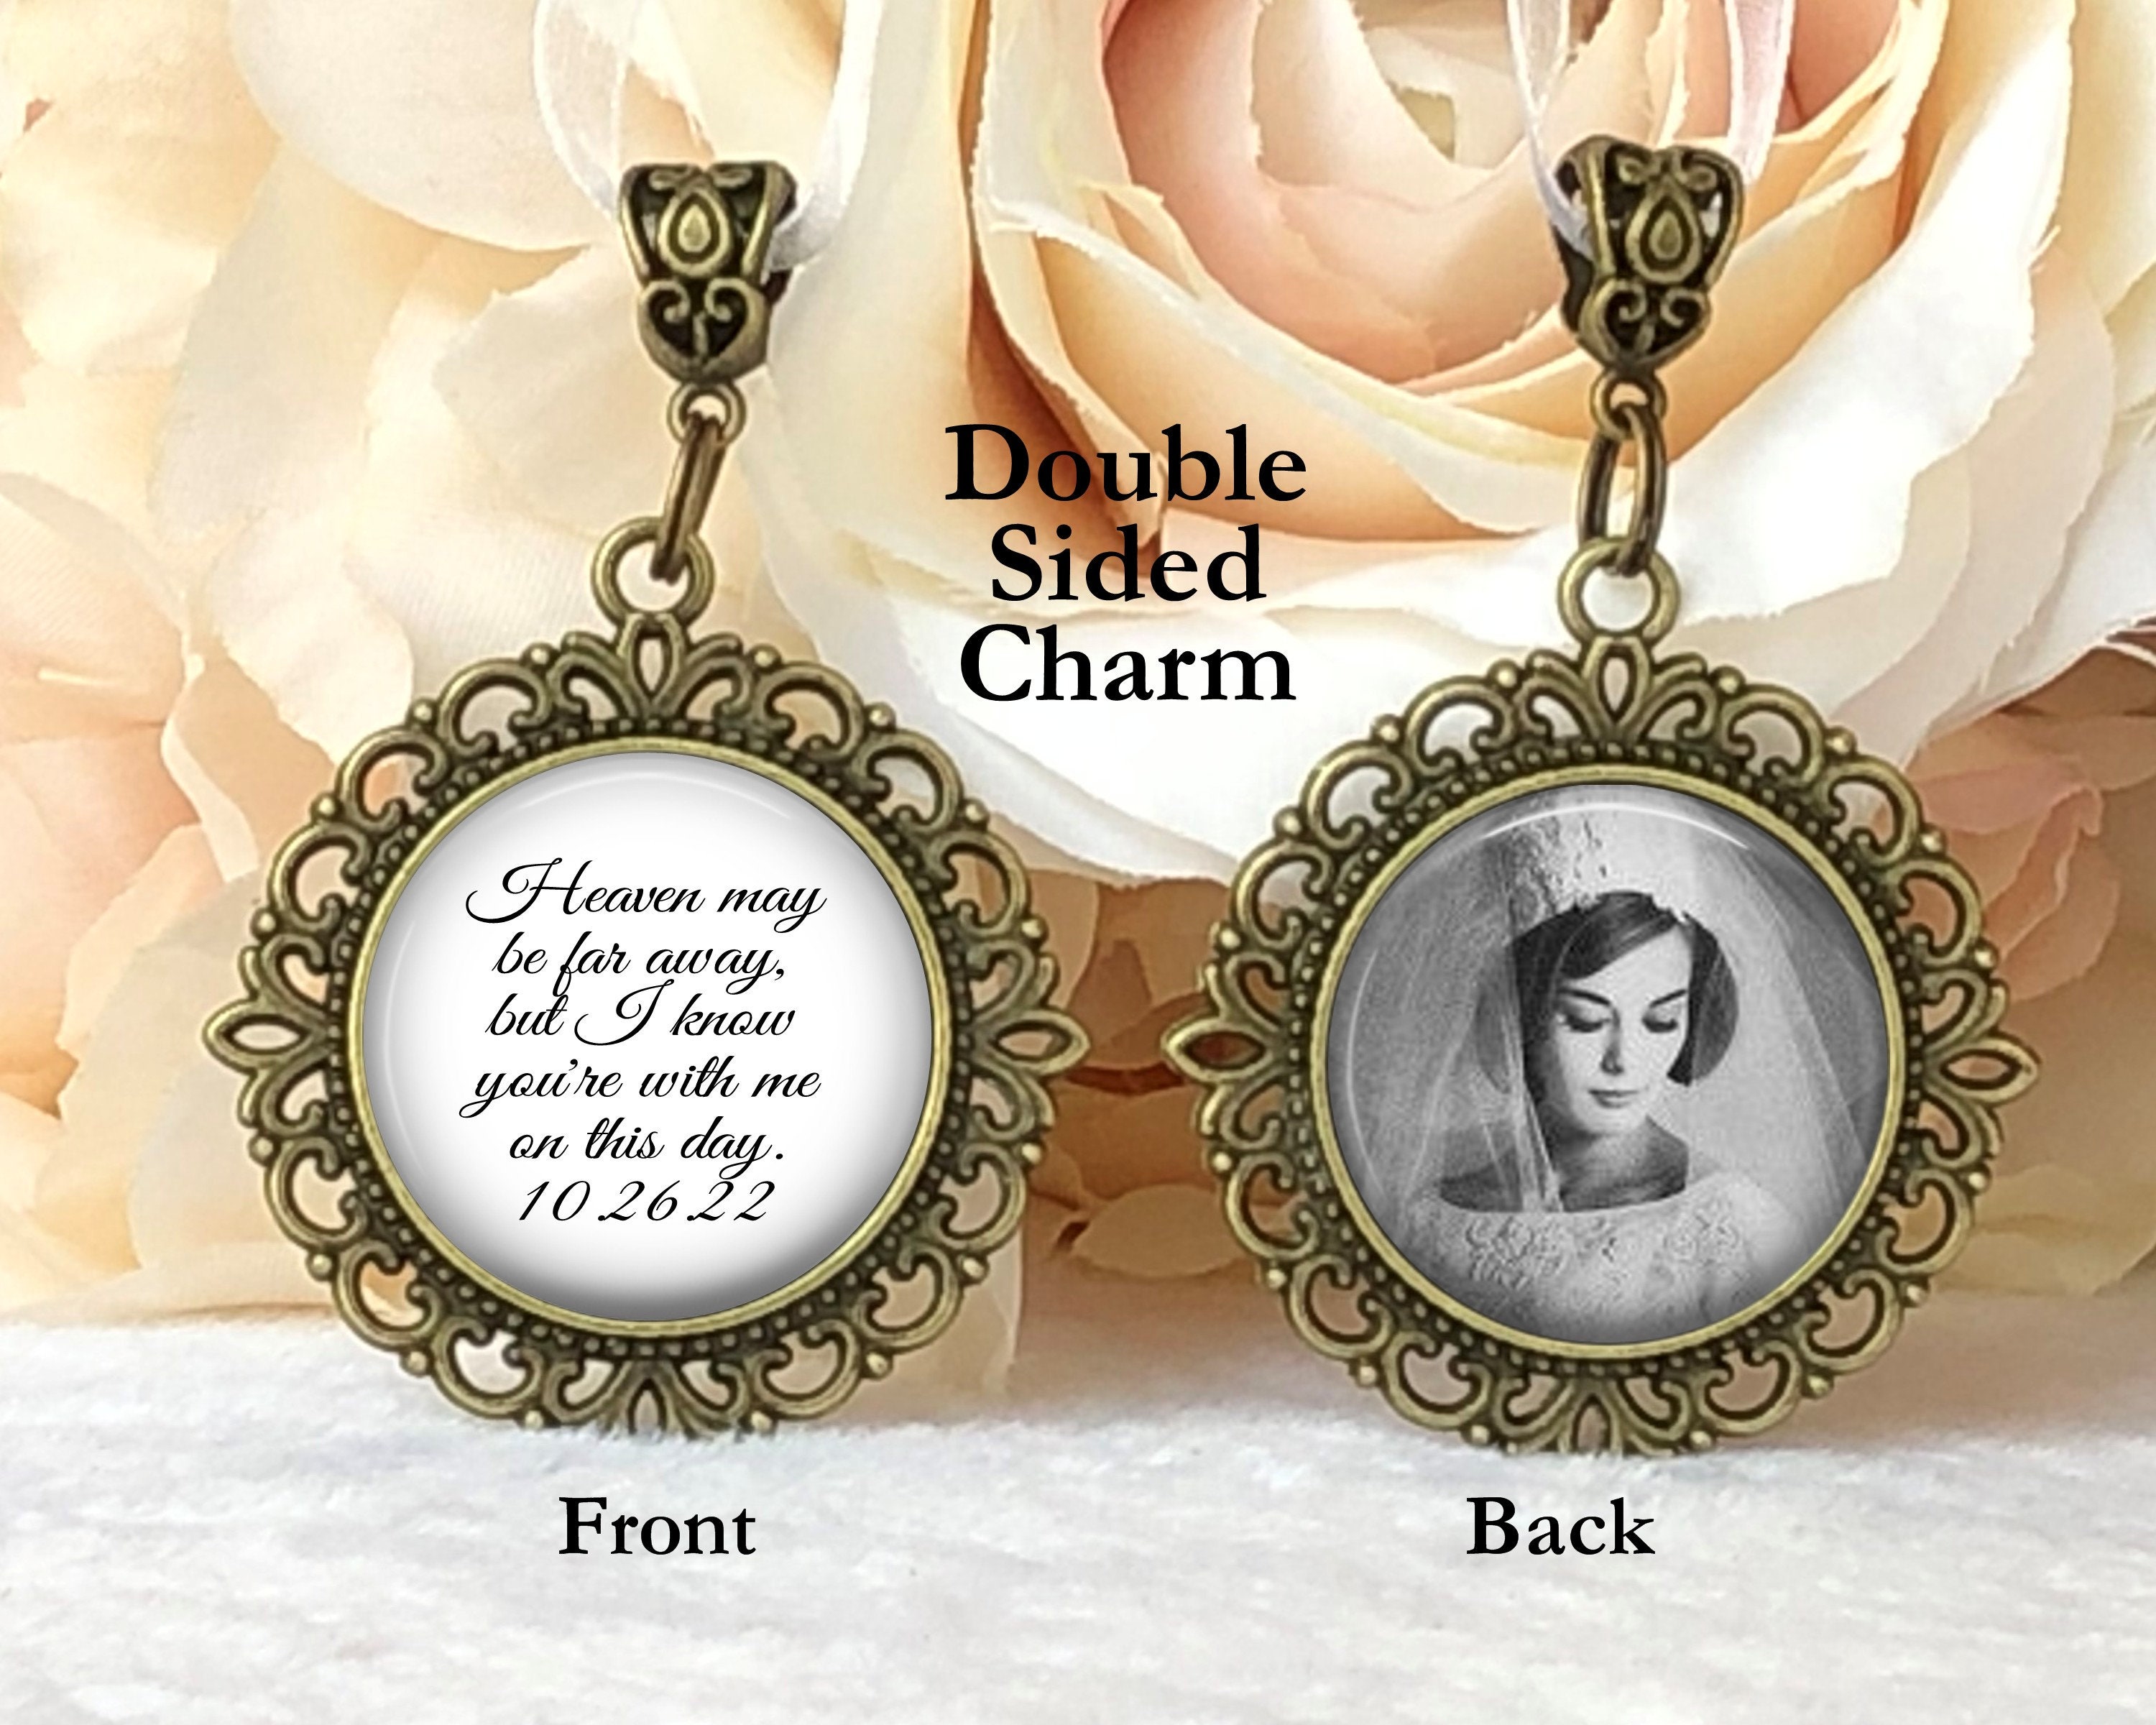  Memory Photo Charms For Wedding Bouquet In Remembrance of  Parents Mom and Dad You Walk Beside Me Vintage Bronze Cream Glass Jewelry  White Bead 2 Frames Ties to Bride's Flowers DIY